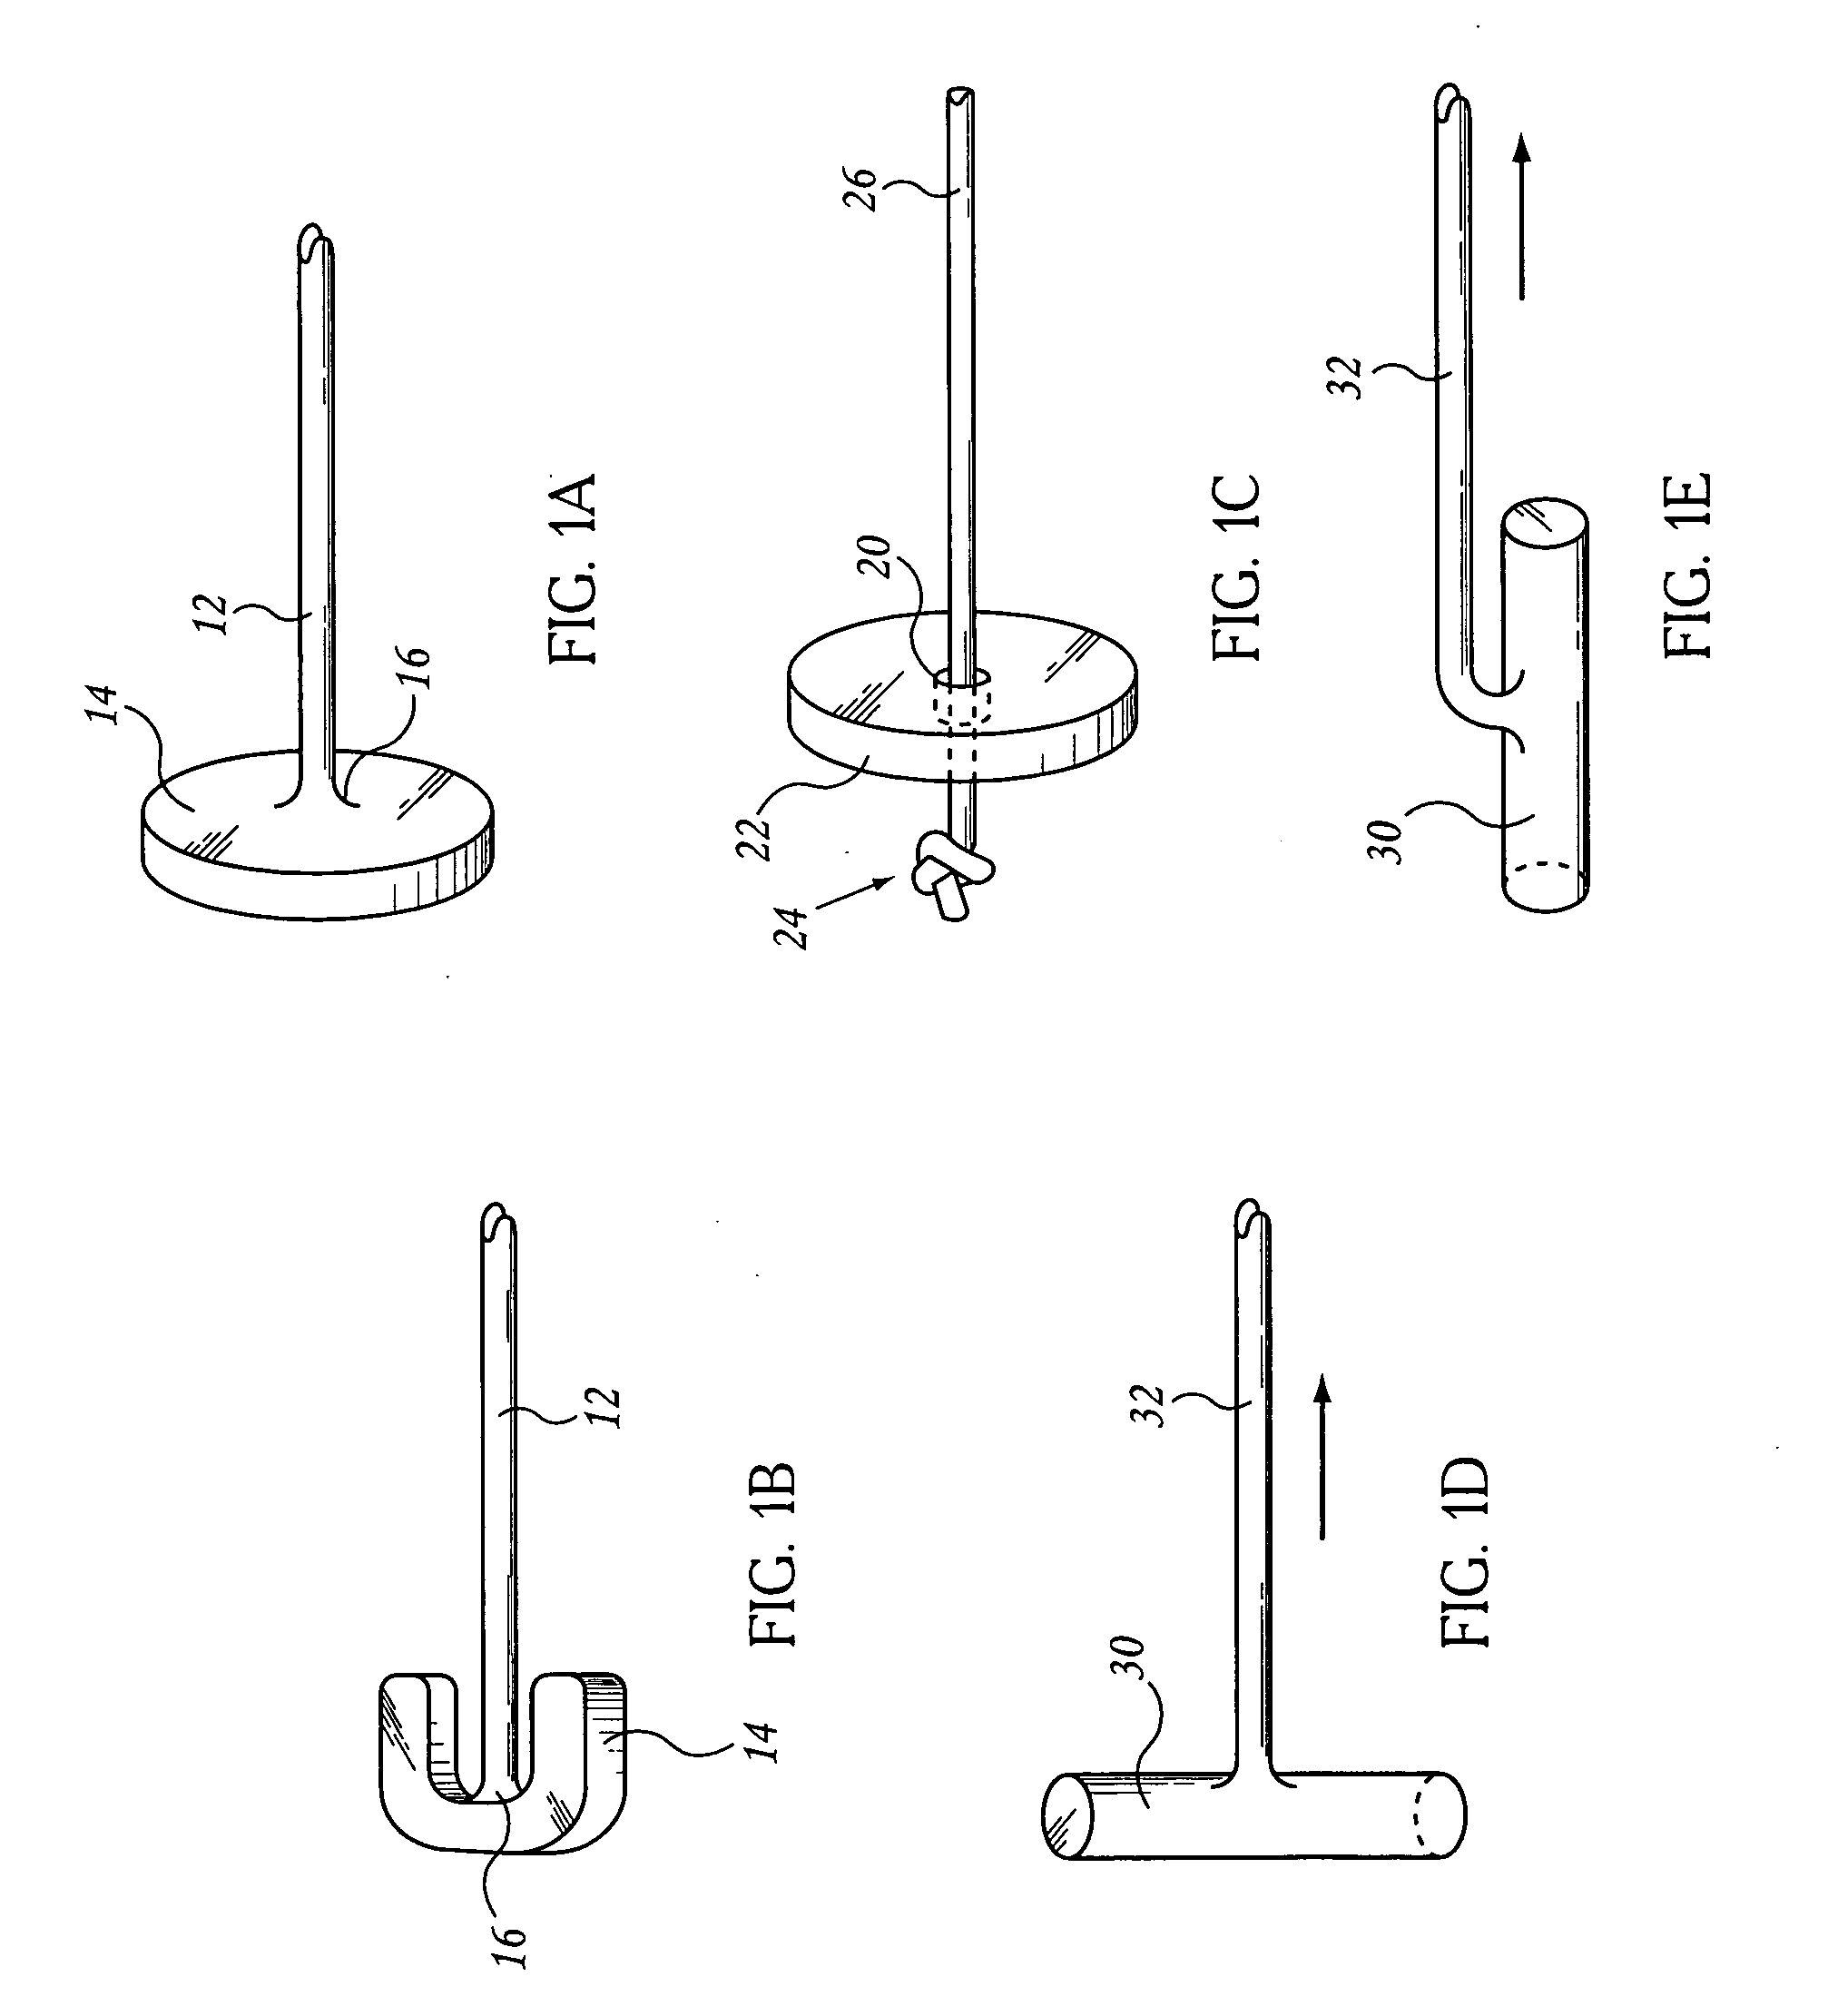 Extragastric devices and methods for gastroplasty